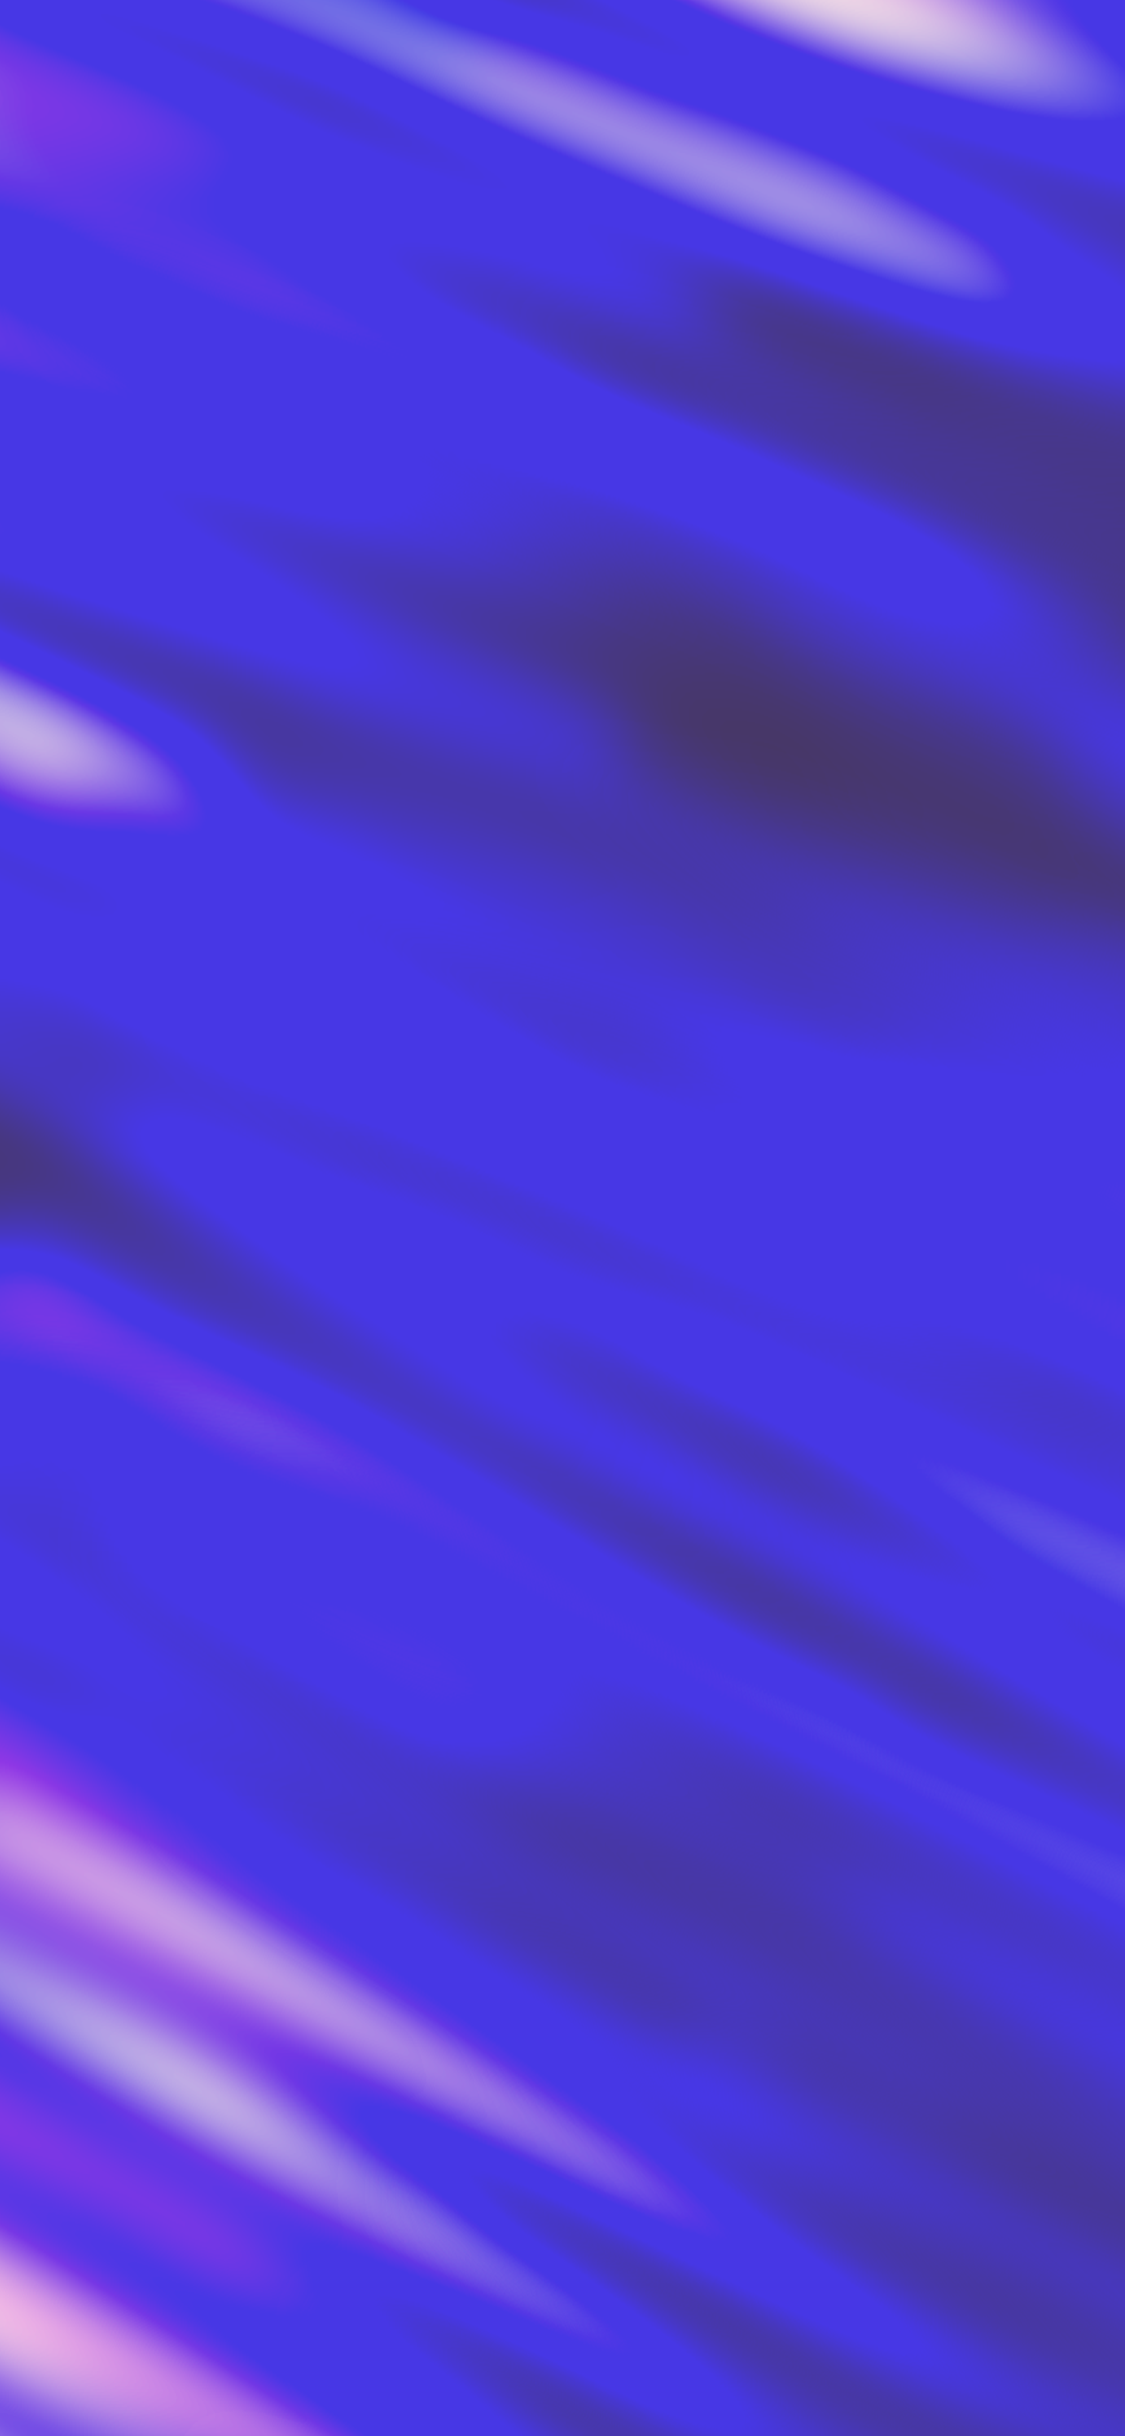 I made some blue and purple gradient wallpaper link in comments